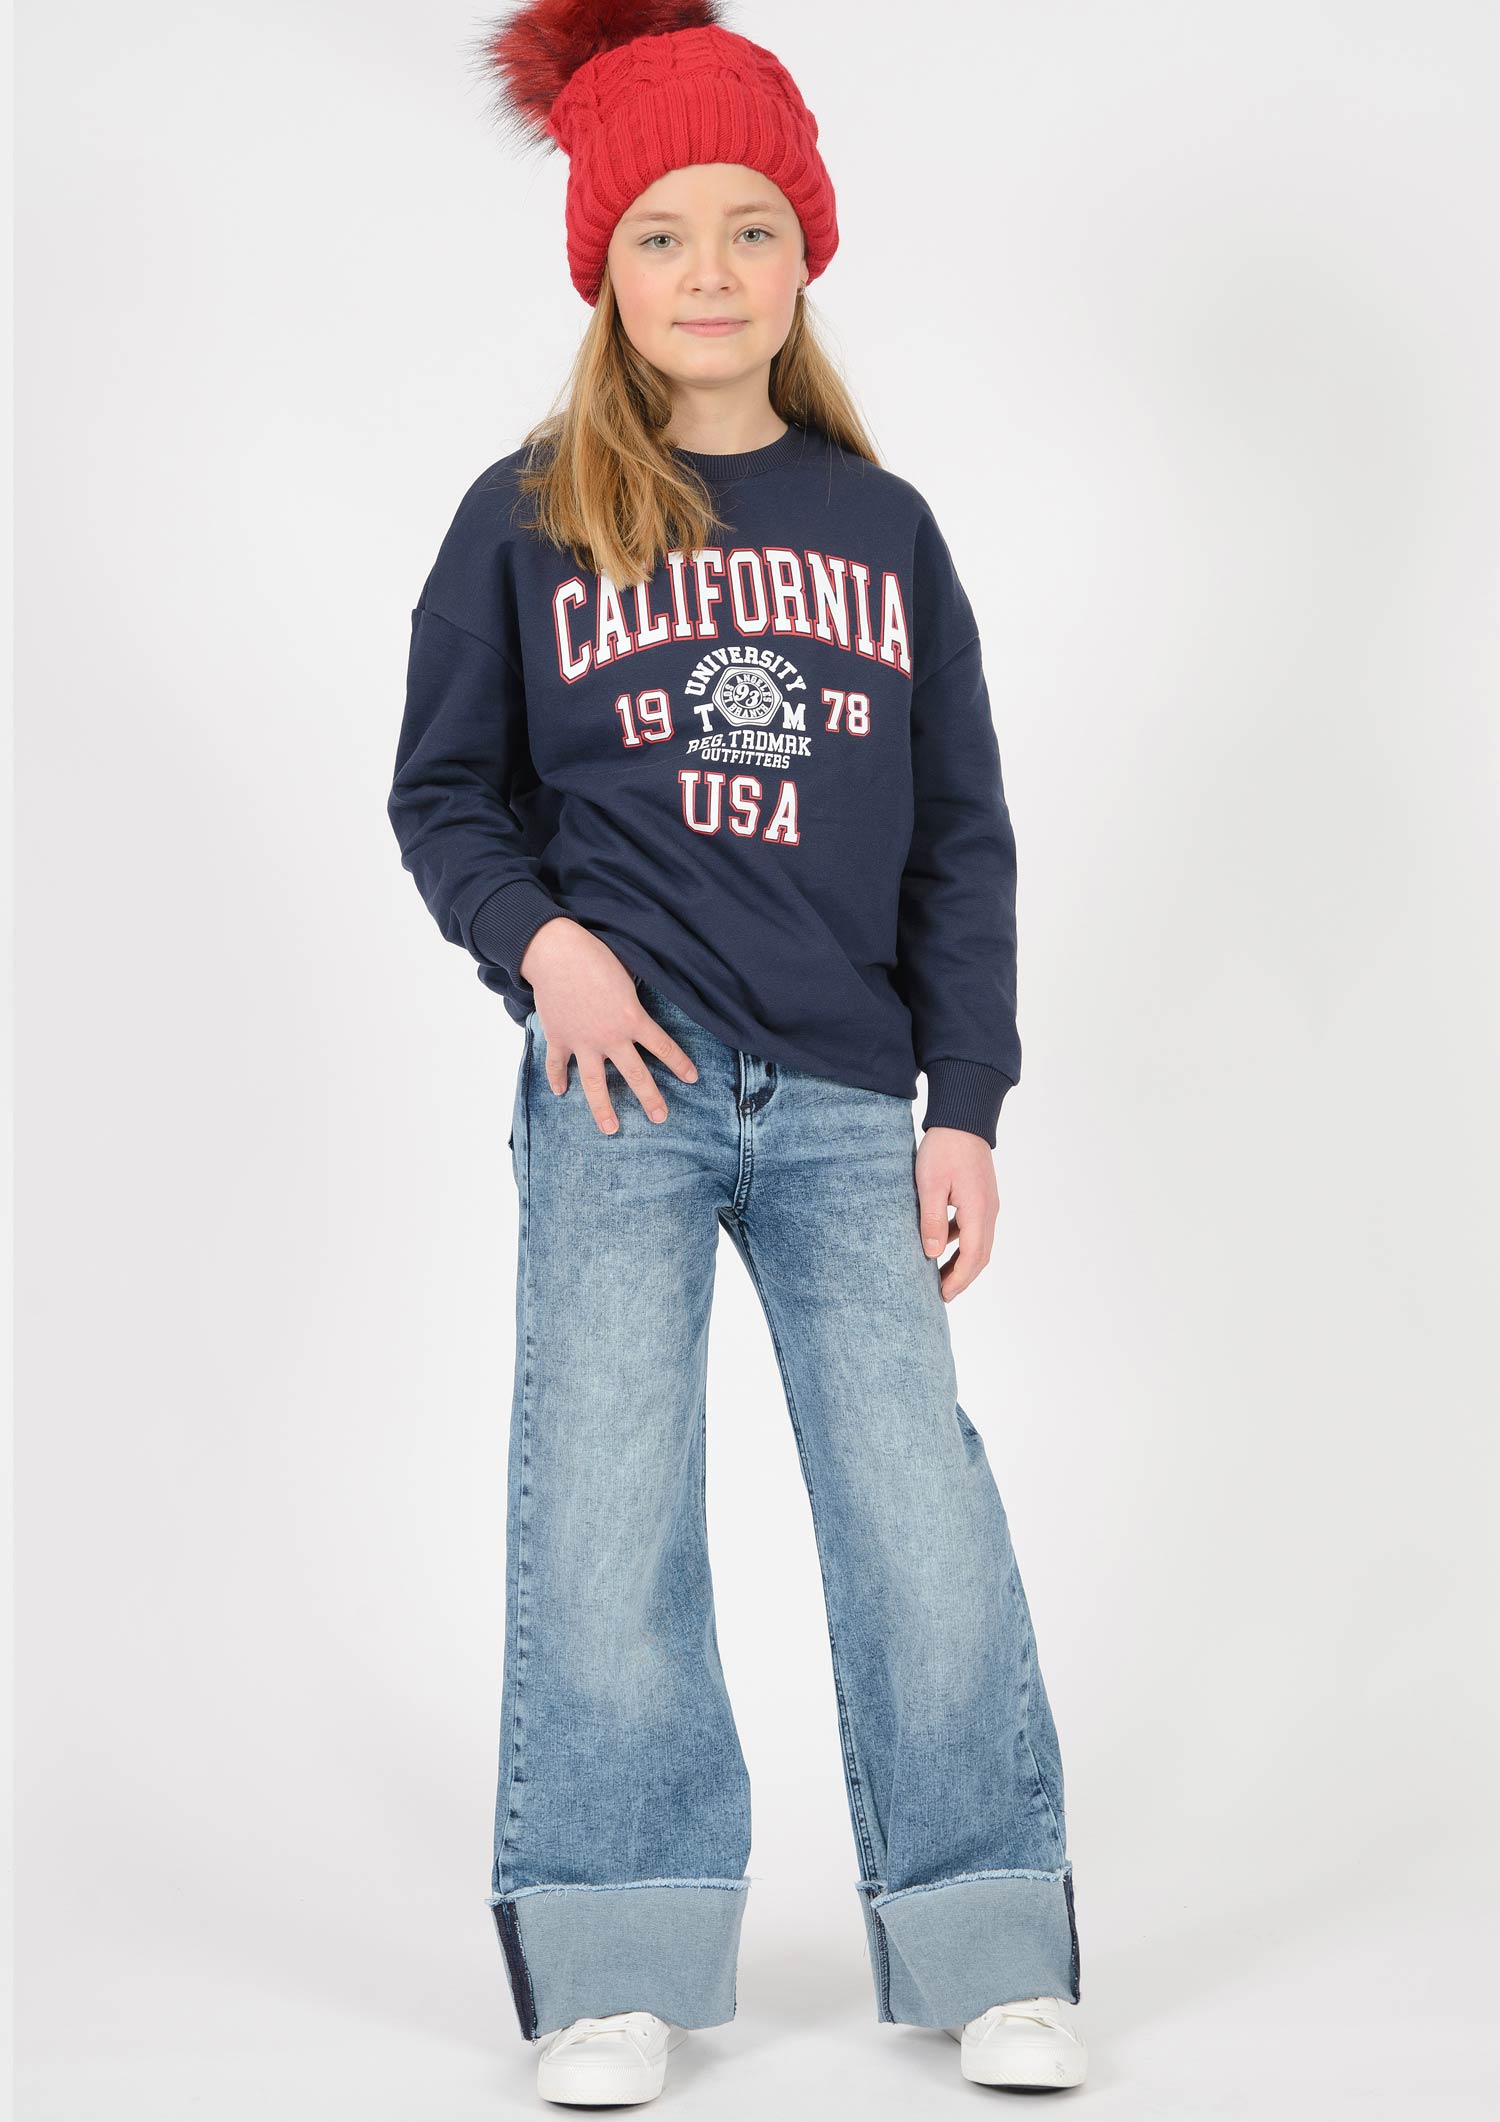 1327-Girls Straight Leg Jeans available in Slim,Normal